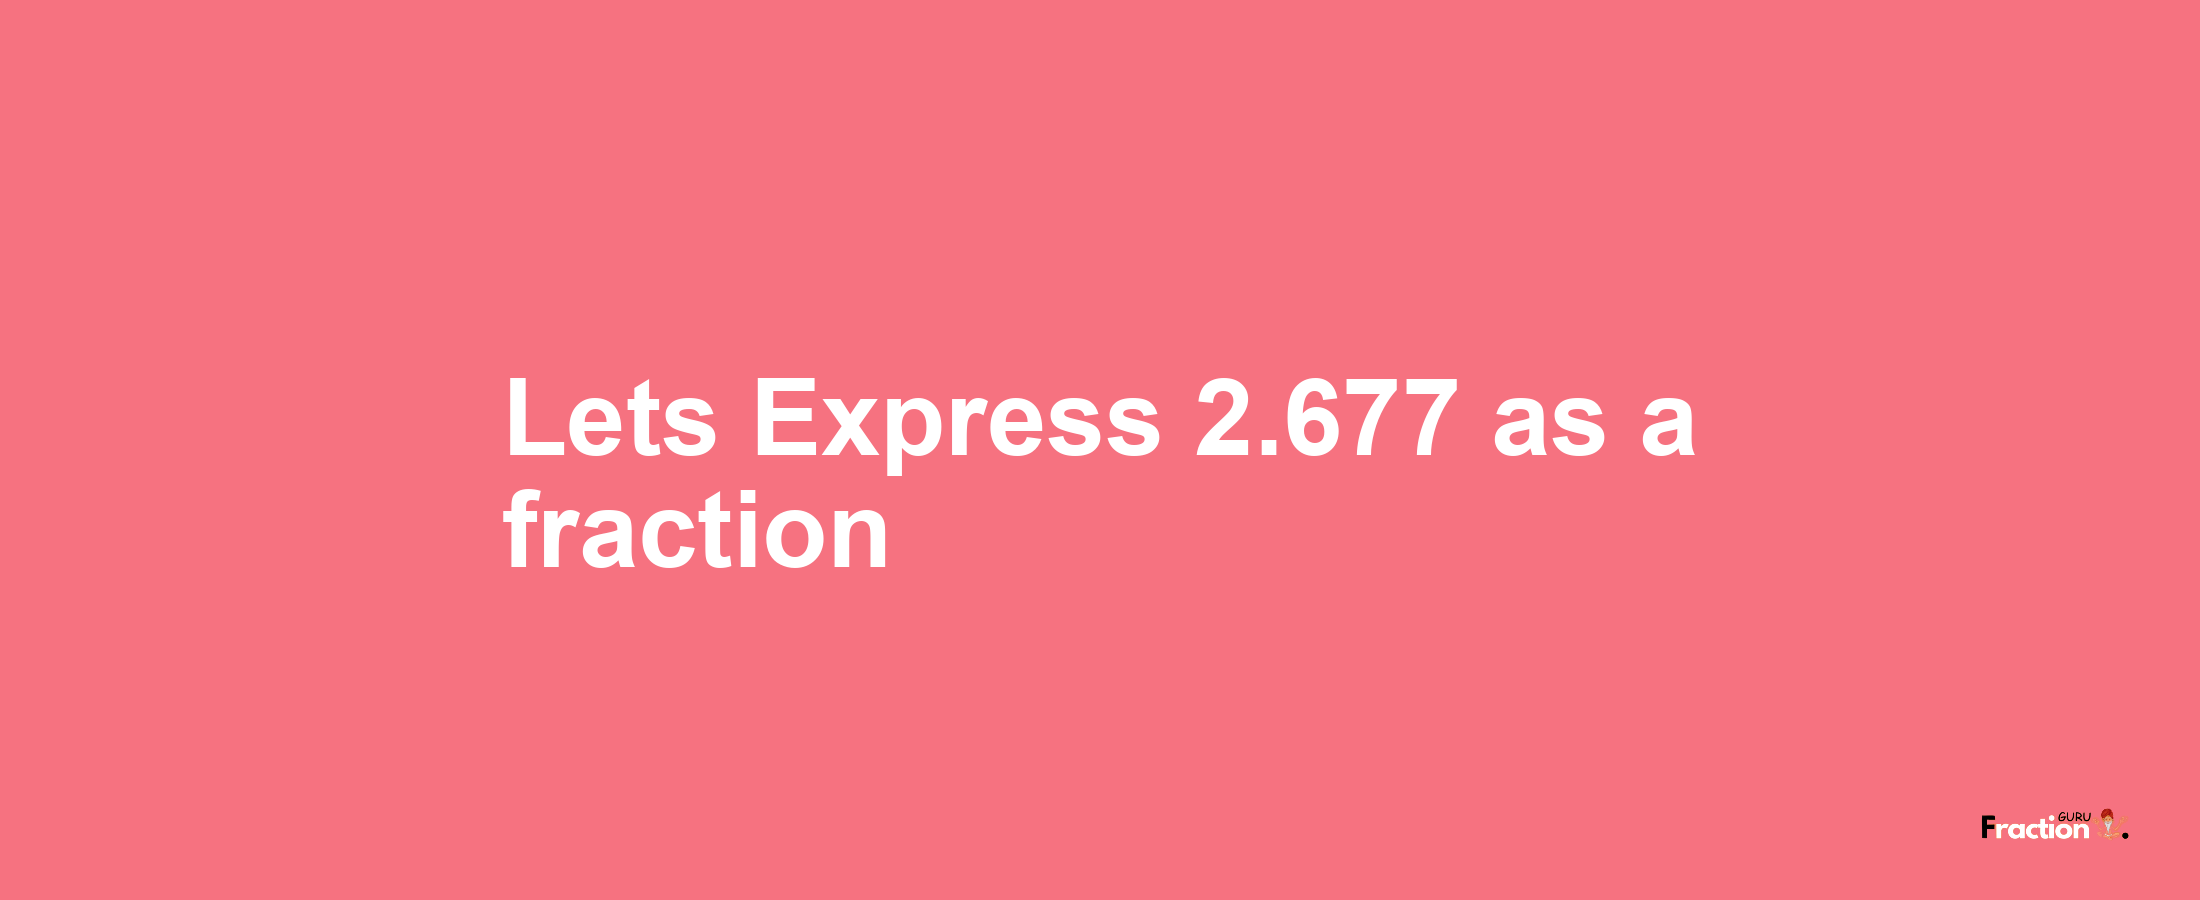 Lets Express 2.677 as afraction